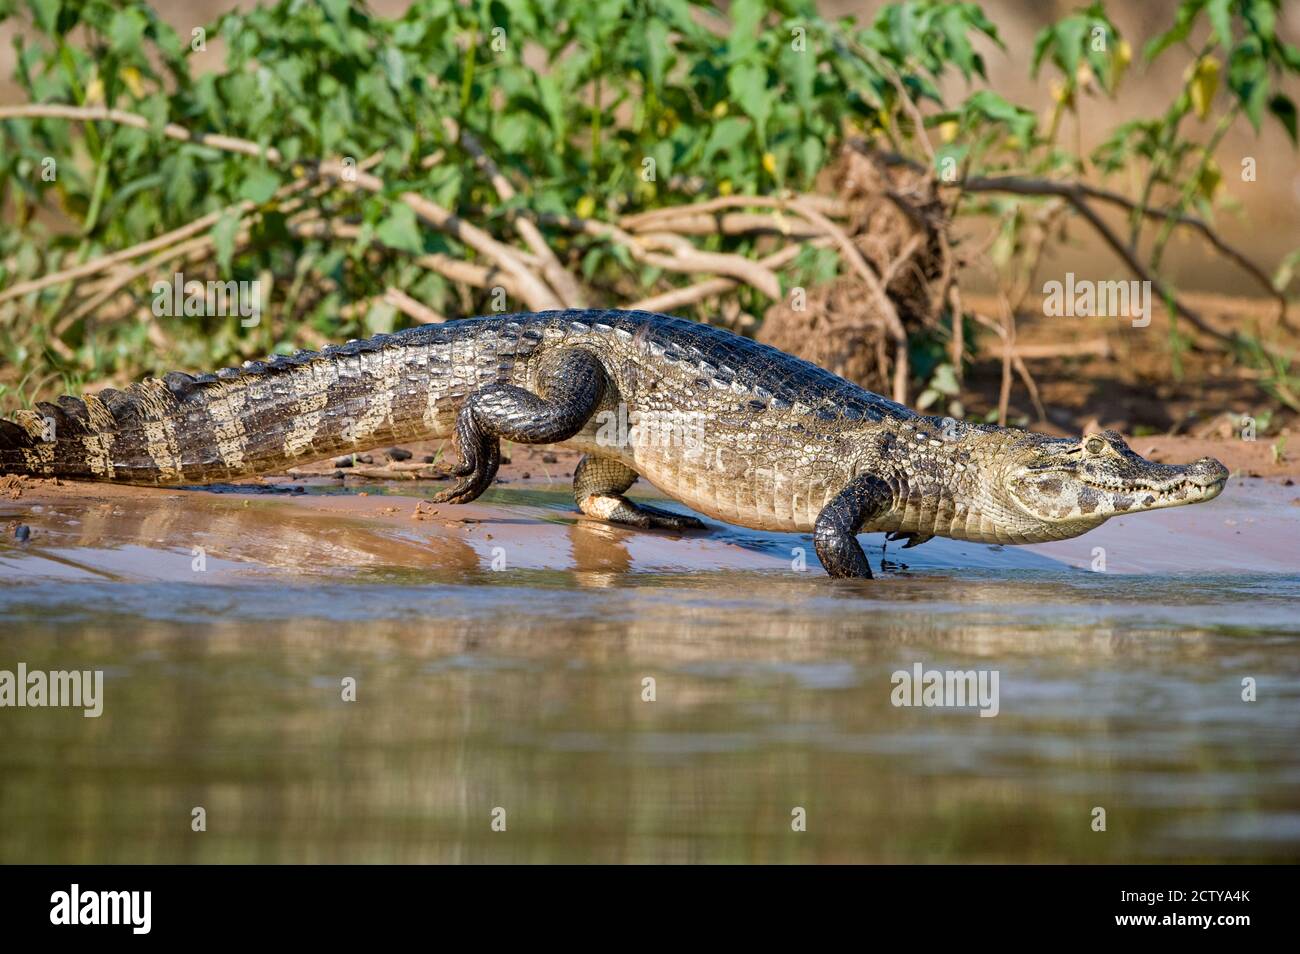 Yacare caiman (Ciman coccodrillo yacare) a riva del fiume, fiume Three Brothers, riunione del parco statale Waters, Pantanal Wetlands, Brasile Foto Stock